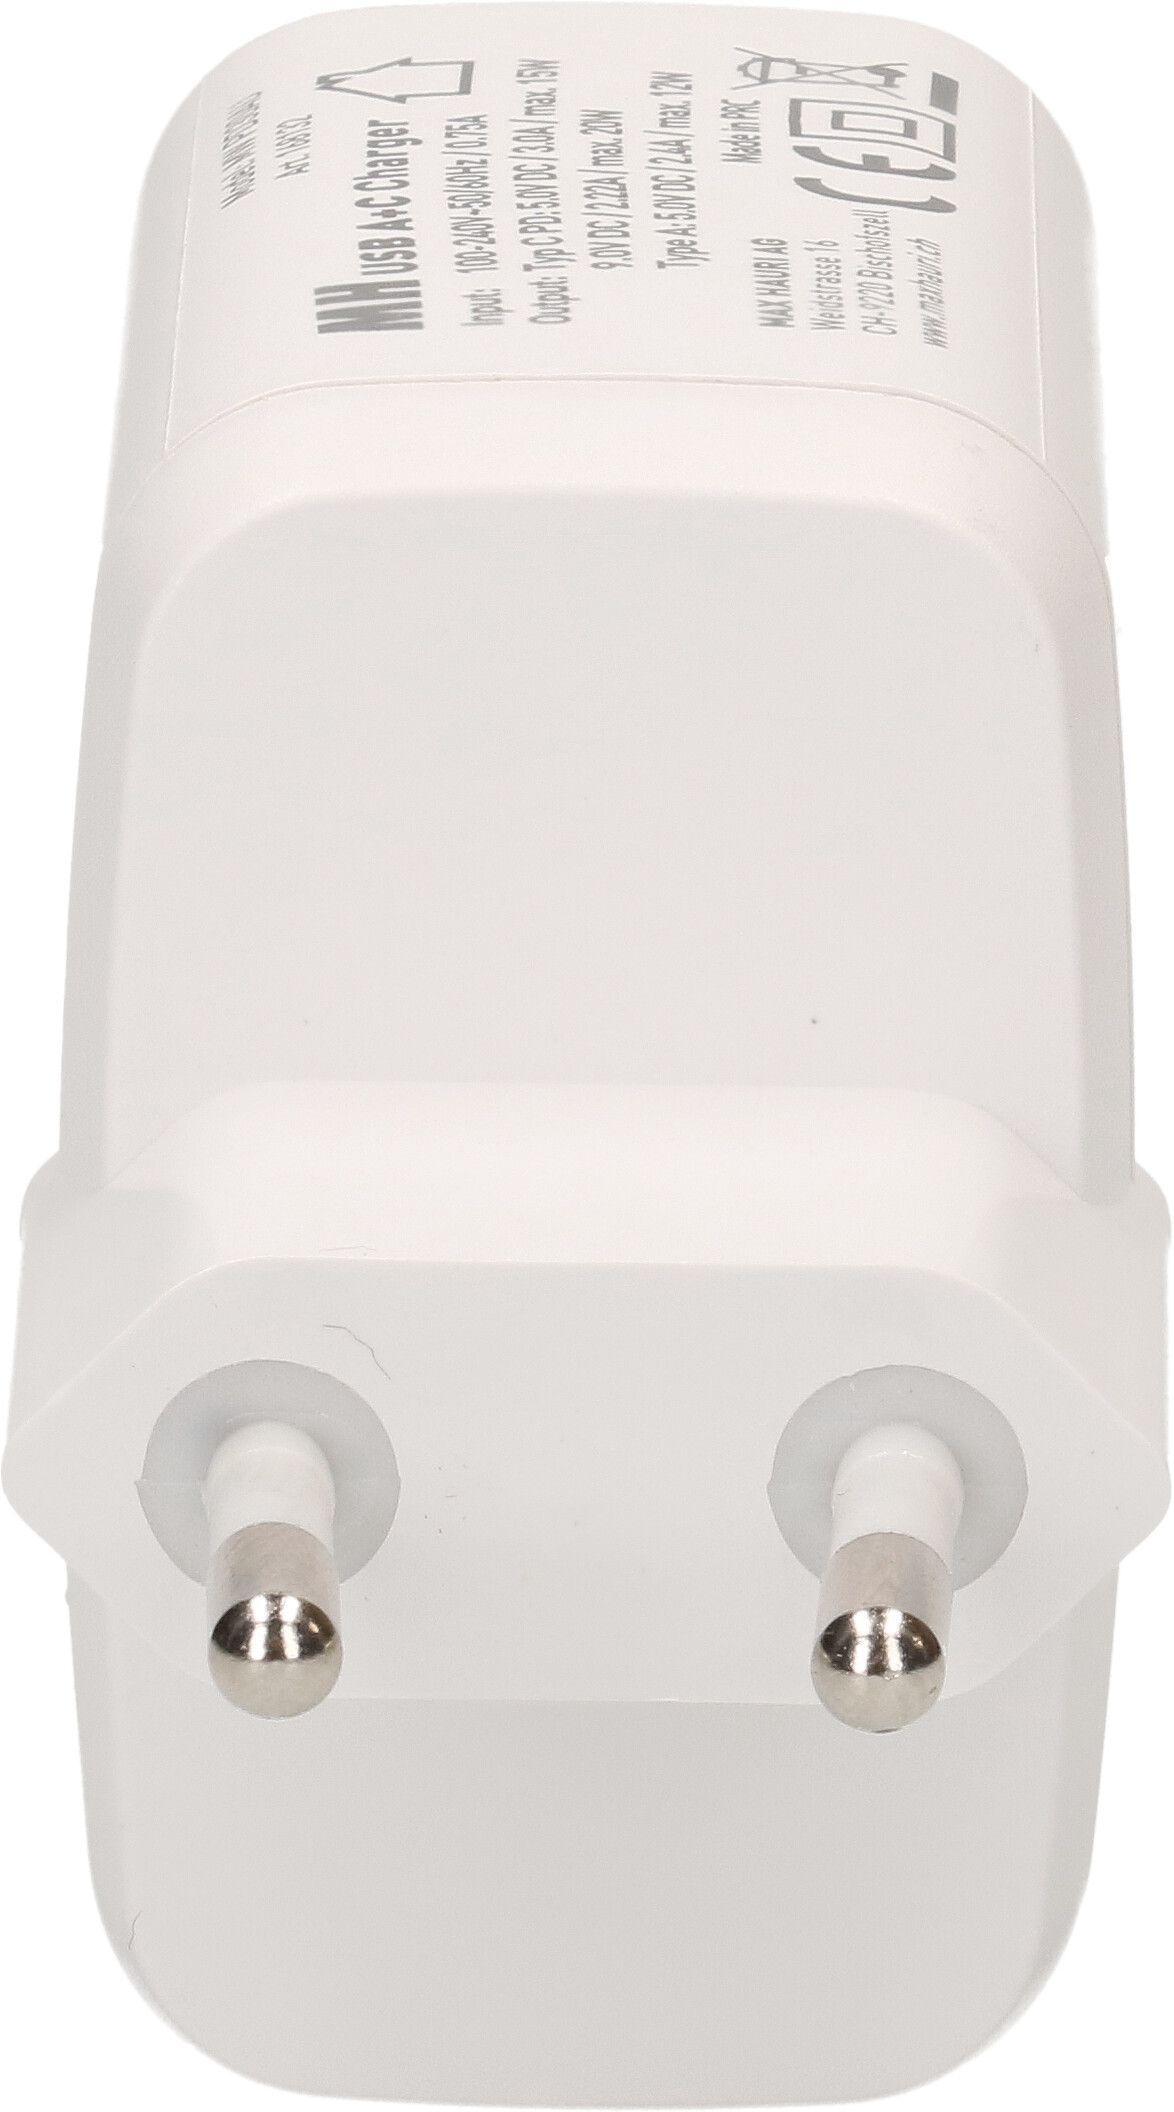 USB Charger USB A/C 30W weiss - MAX HAURI AG